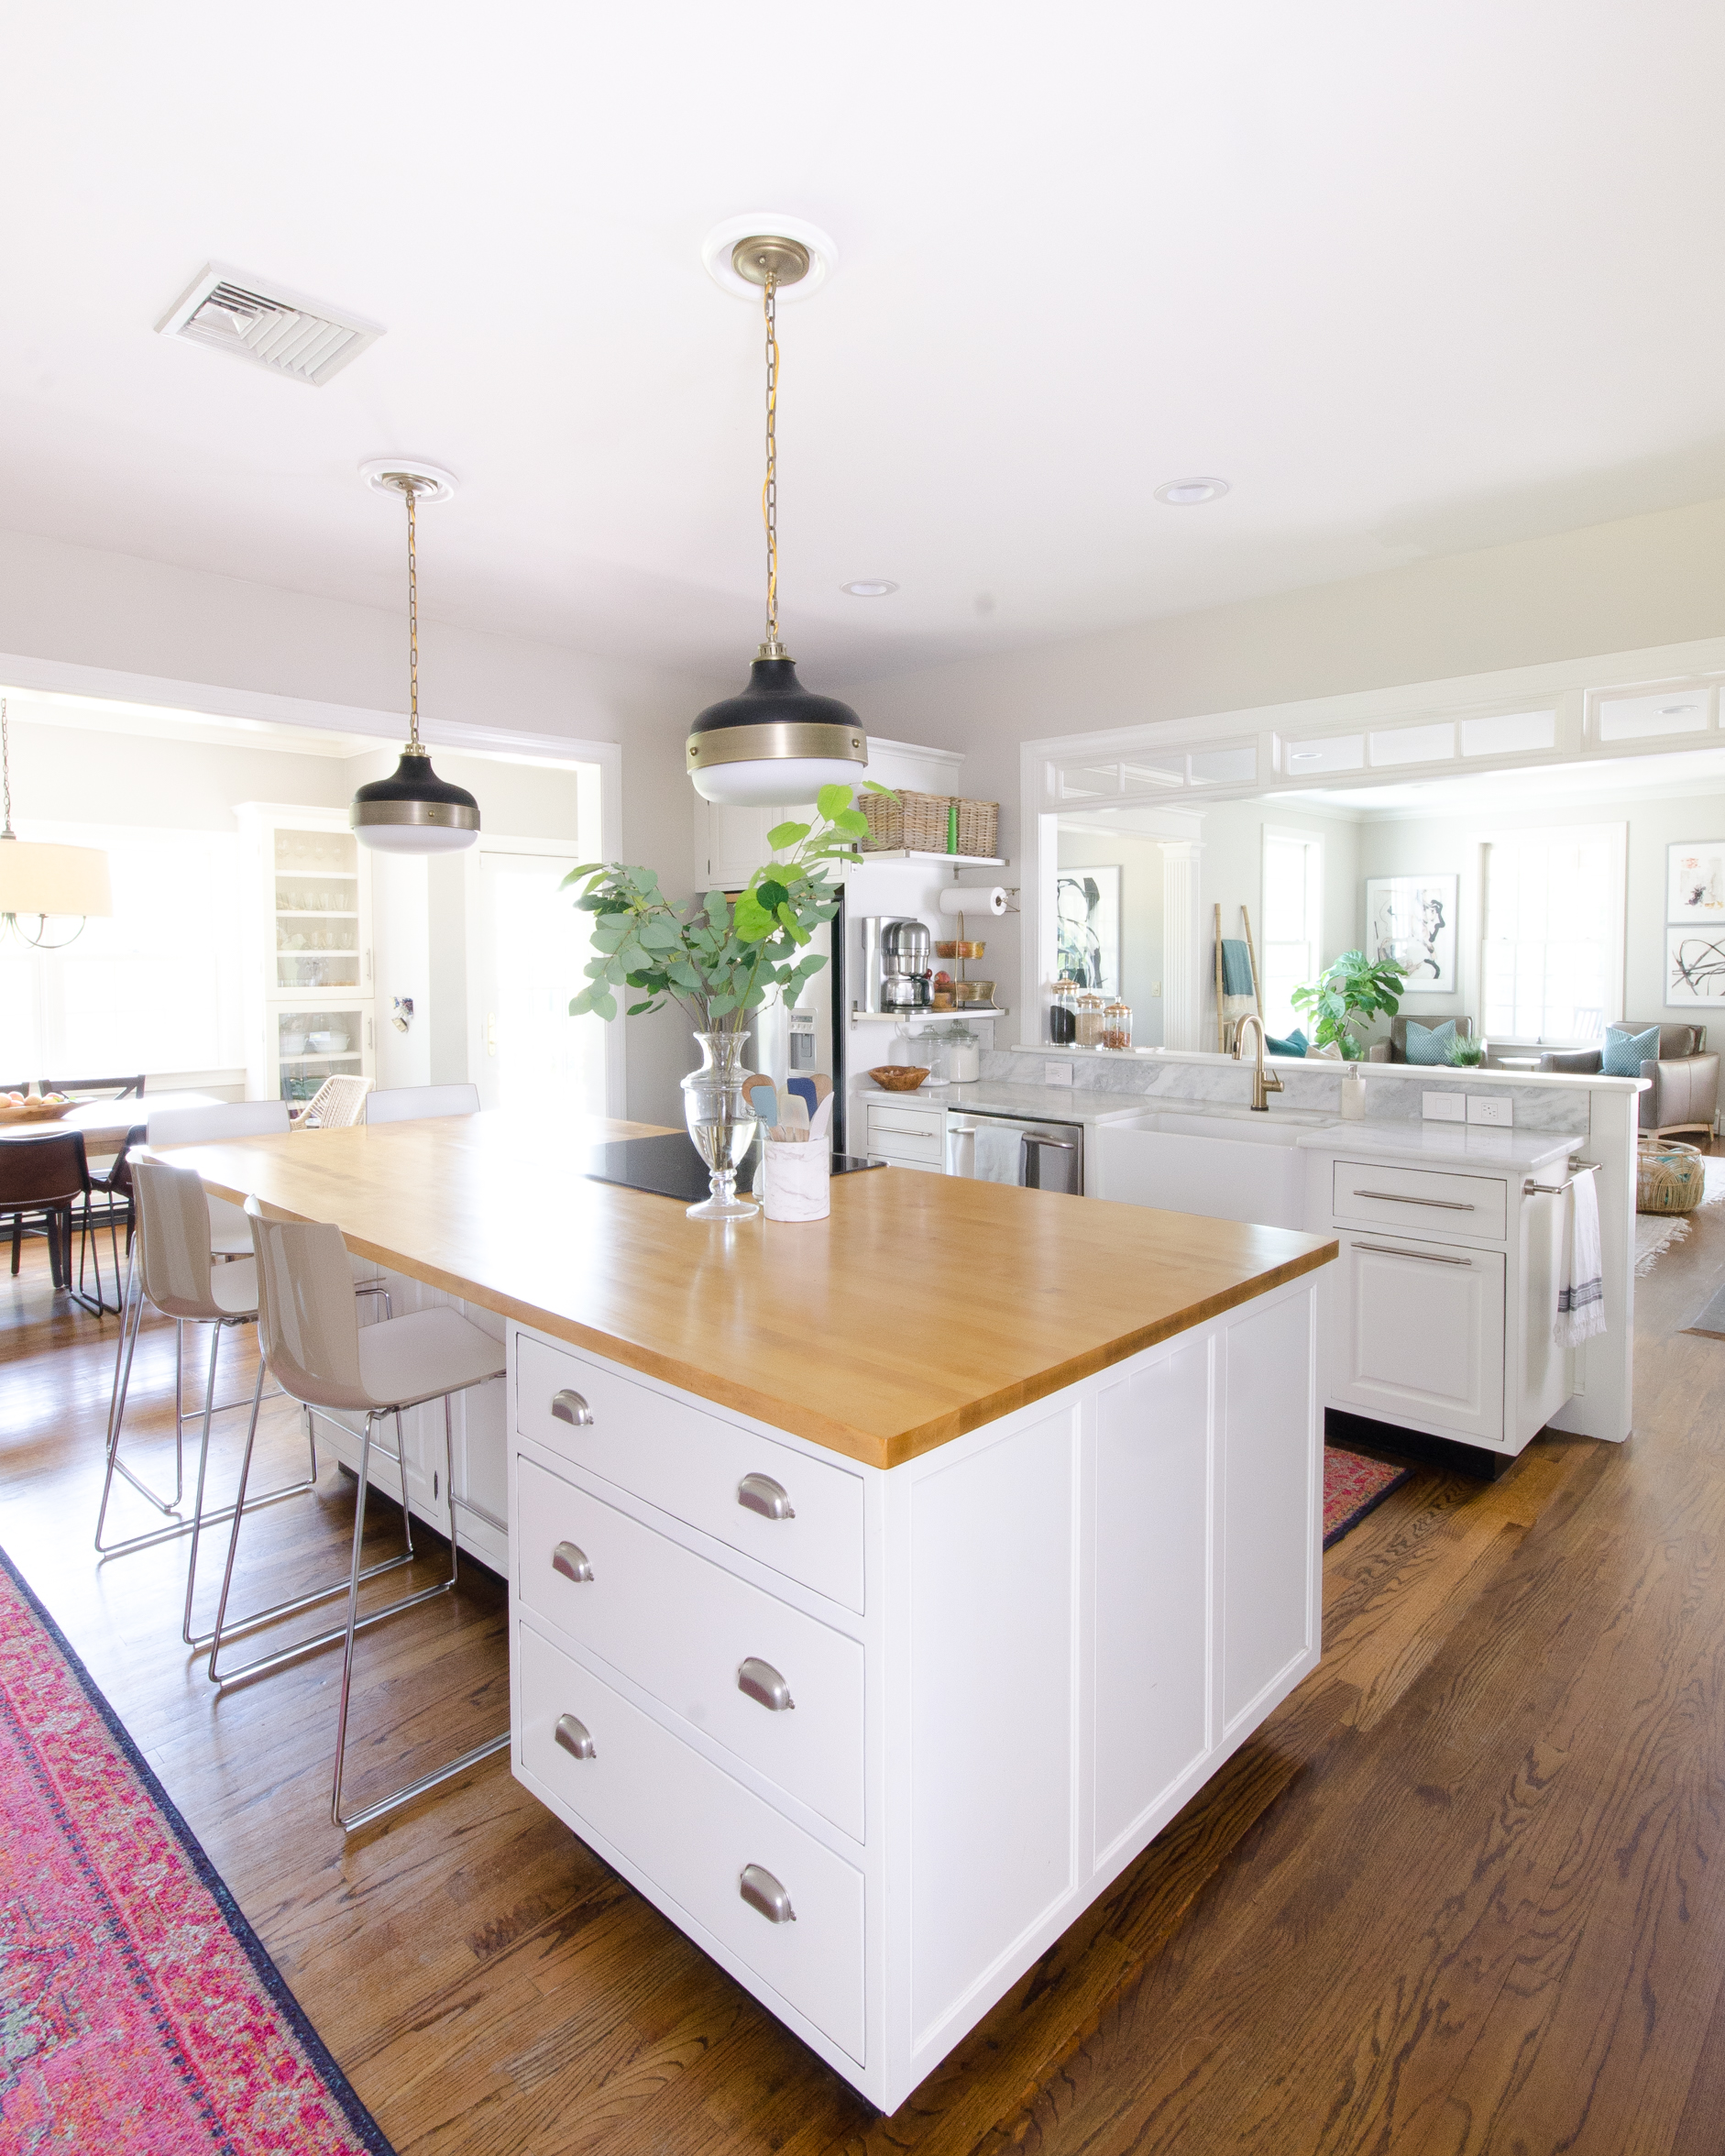 How To Seal Butcher Block Counters, Do You Have To Polyurethane Butcher Block Countertops